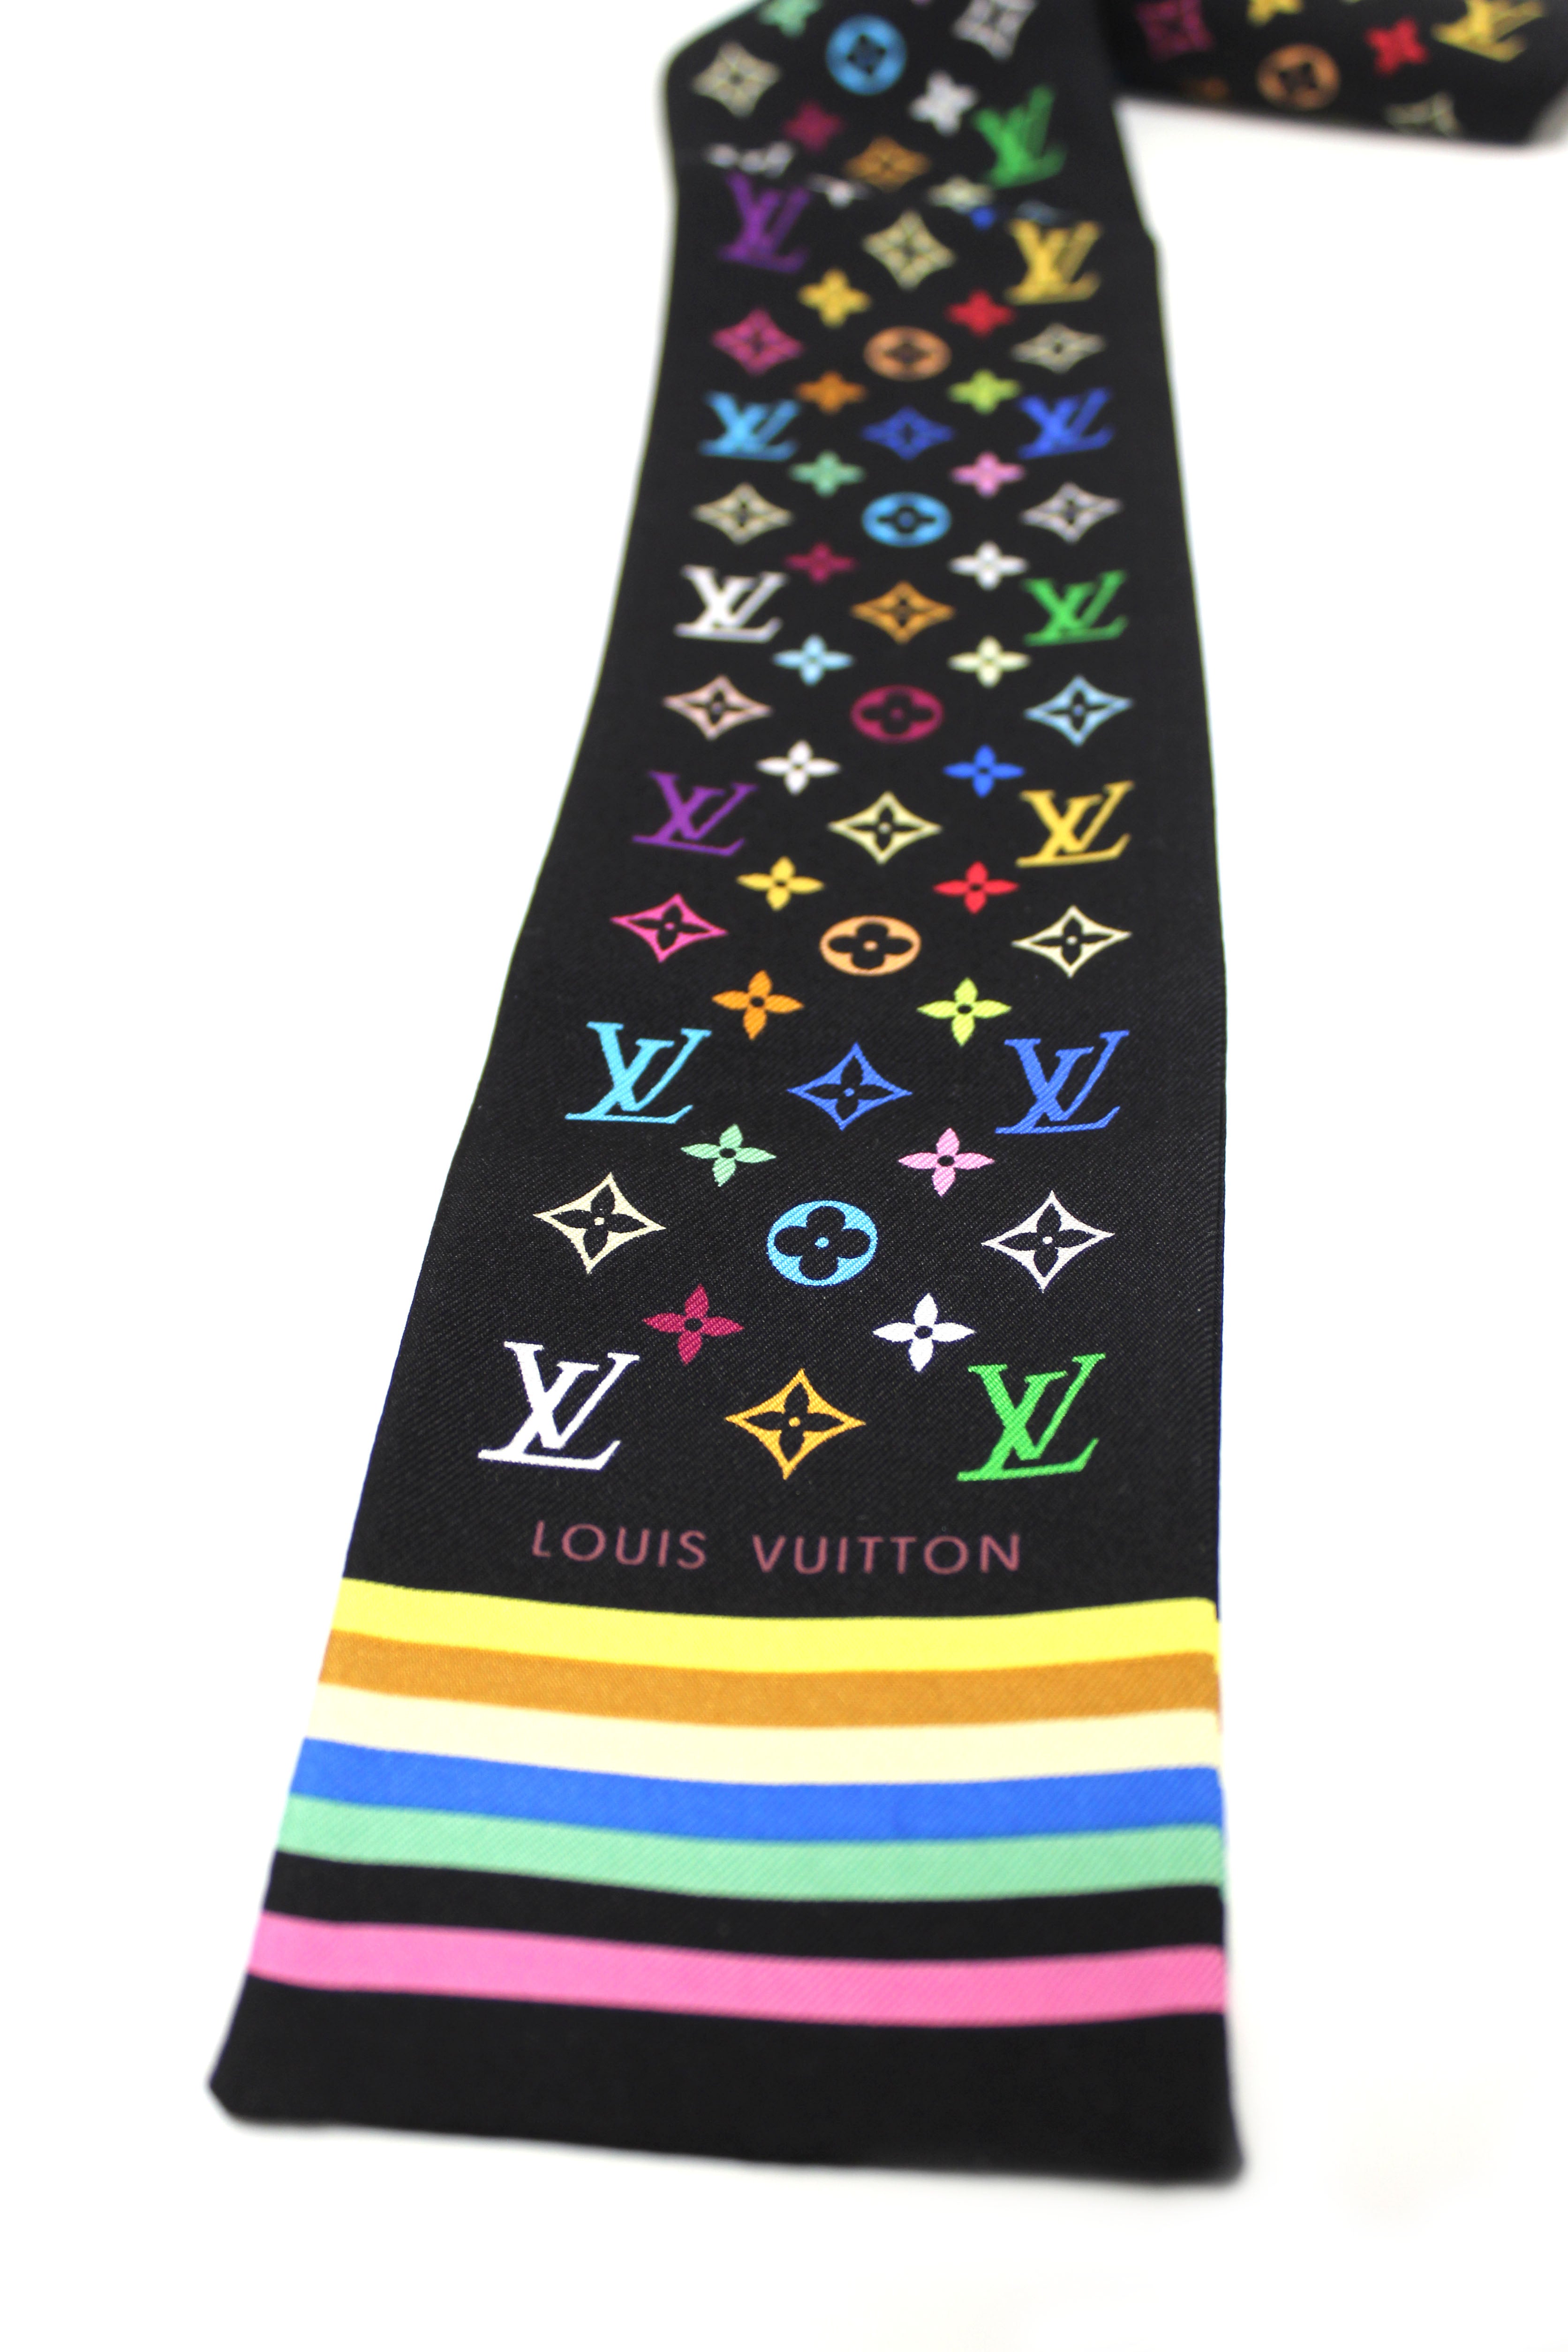 Authenticated used Louis Vuitton Twilly Scarf Muffler Louis Vuitton Multicolor Ribbon Black/Multicolor M71992 Ladies Silk 100%, Adult Unisex, Size